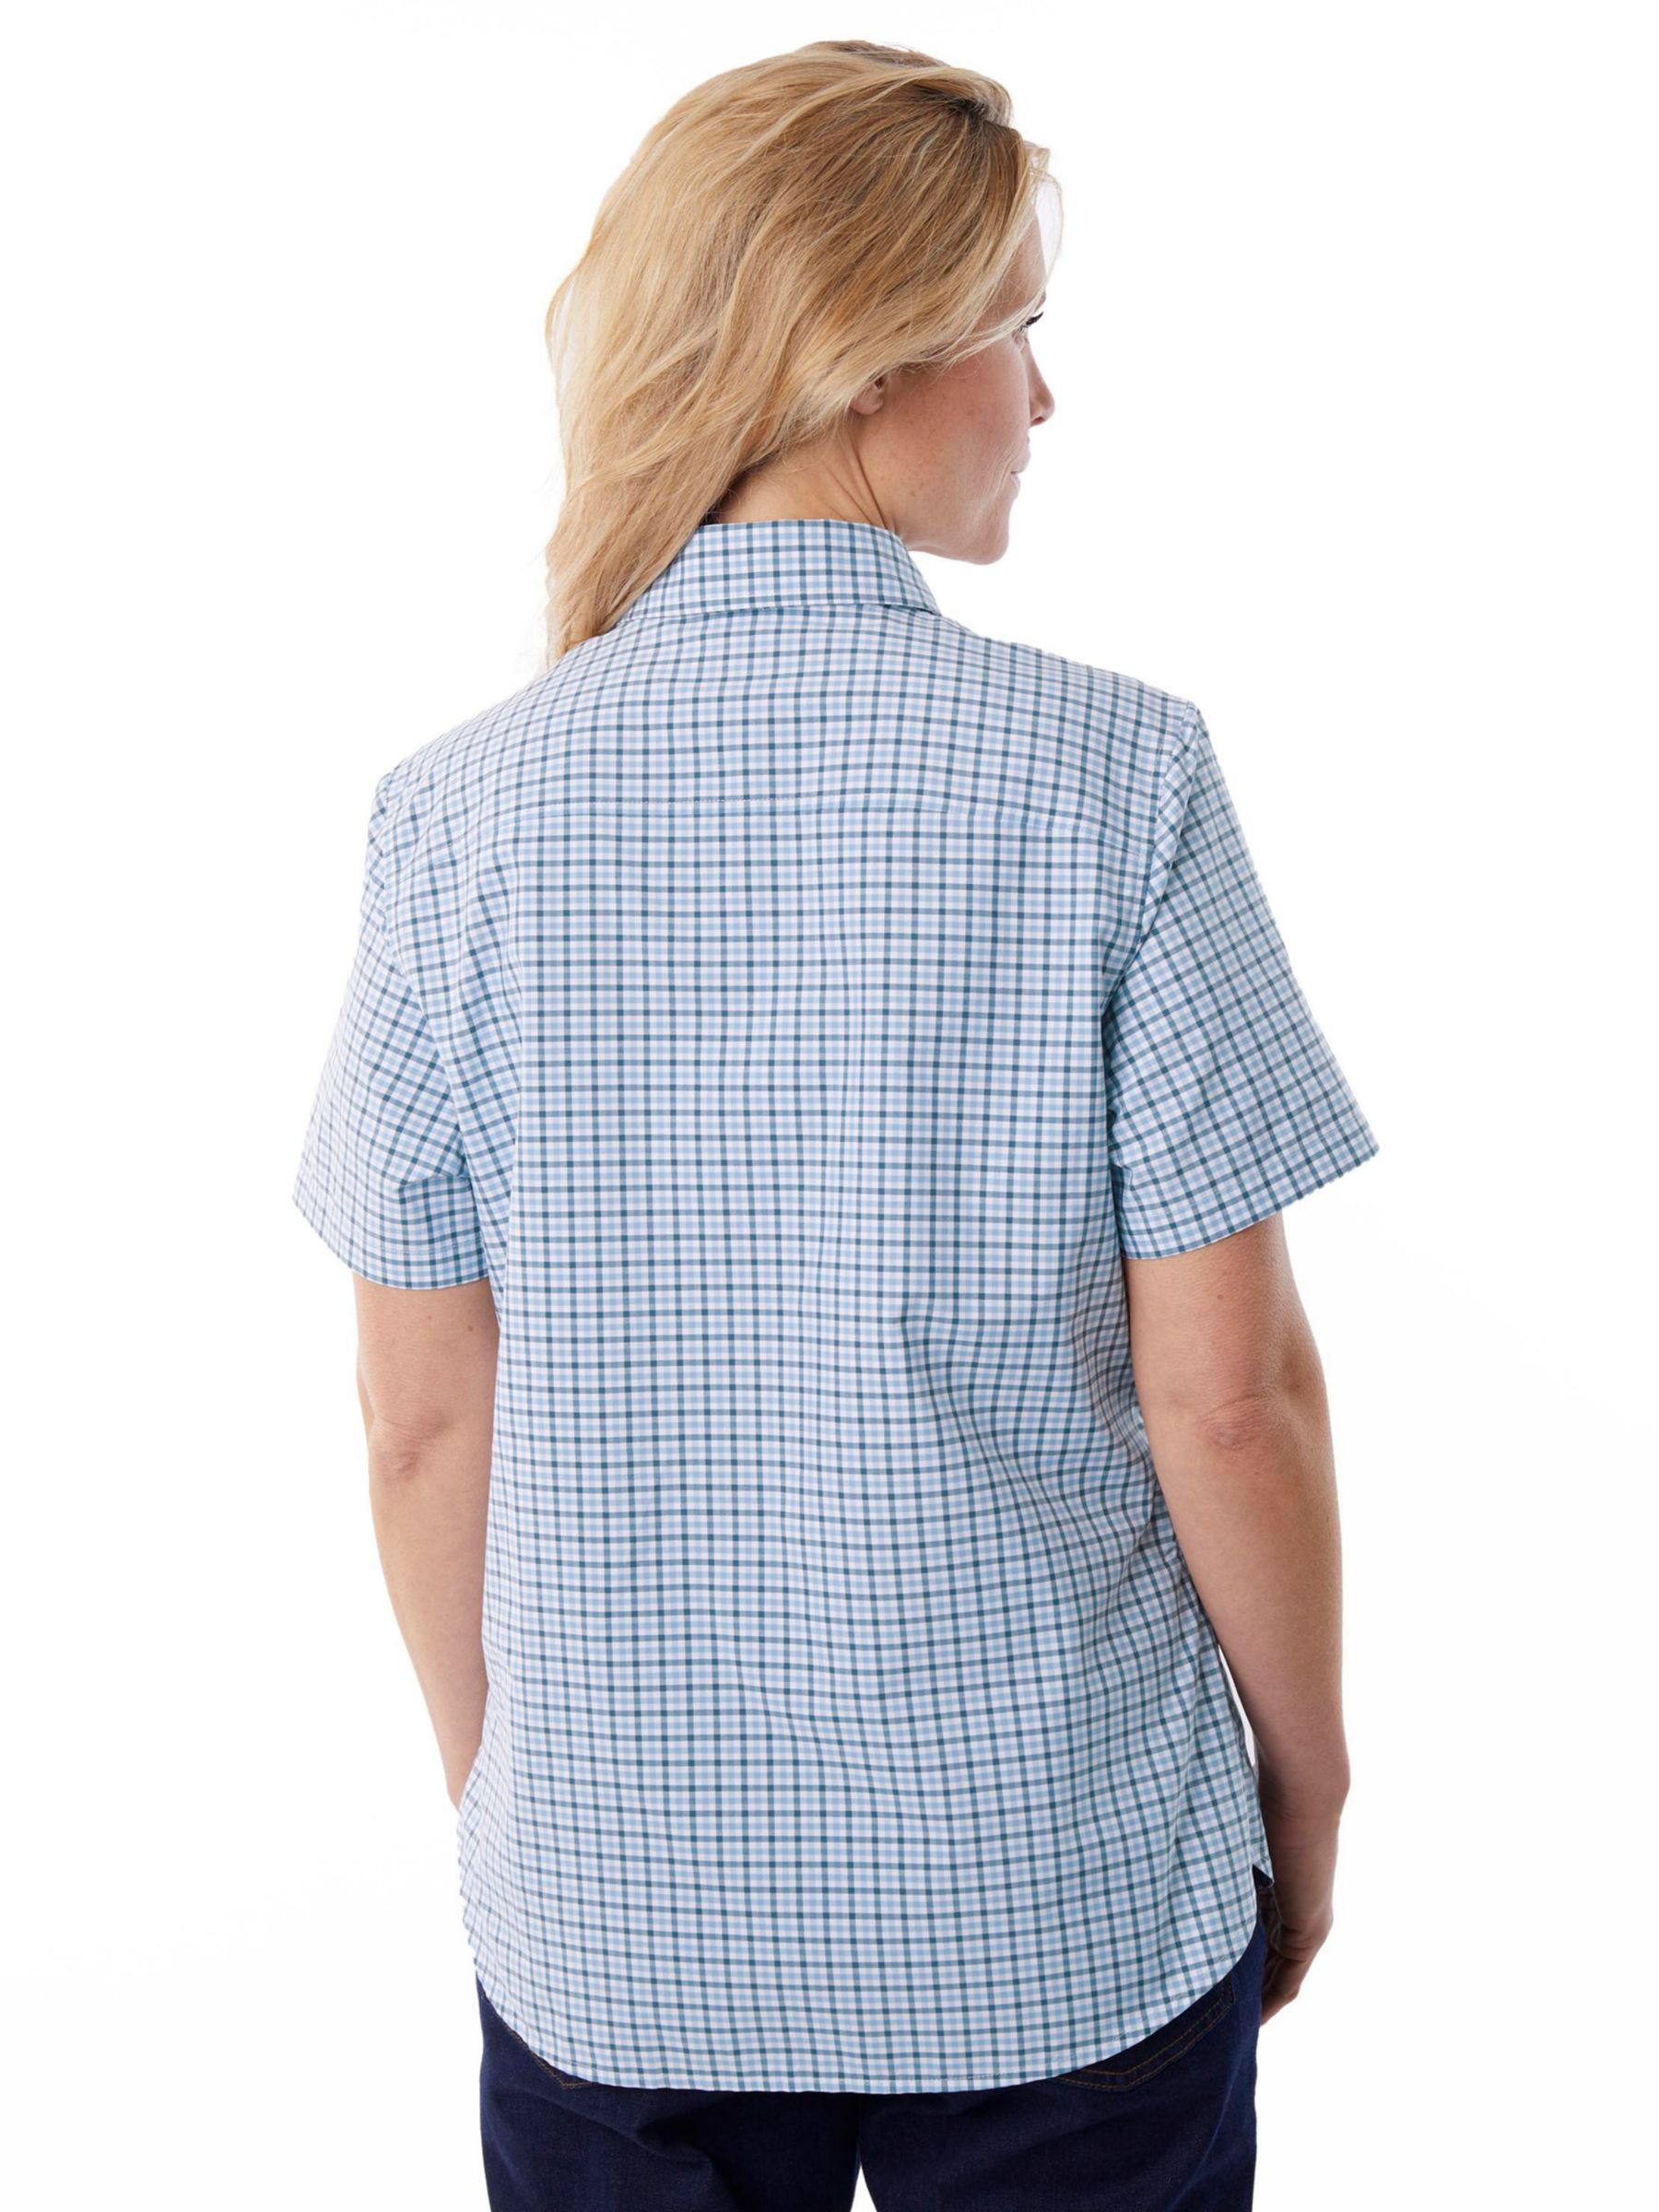 Buy Rohan Eave Short Sleeve Gingham Shirt, Chambray Blue Online at johnlewis.com